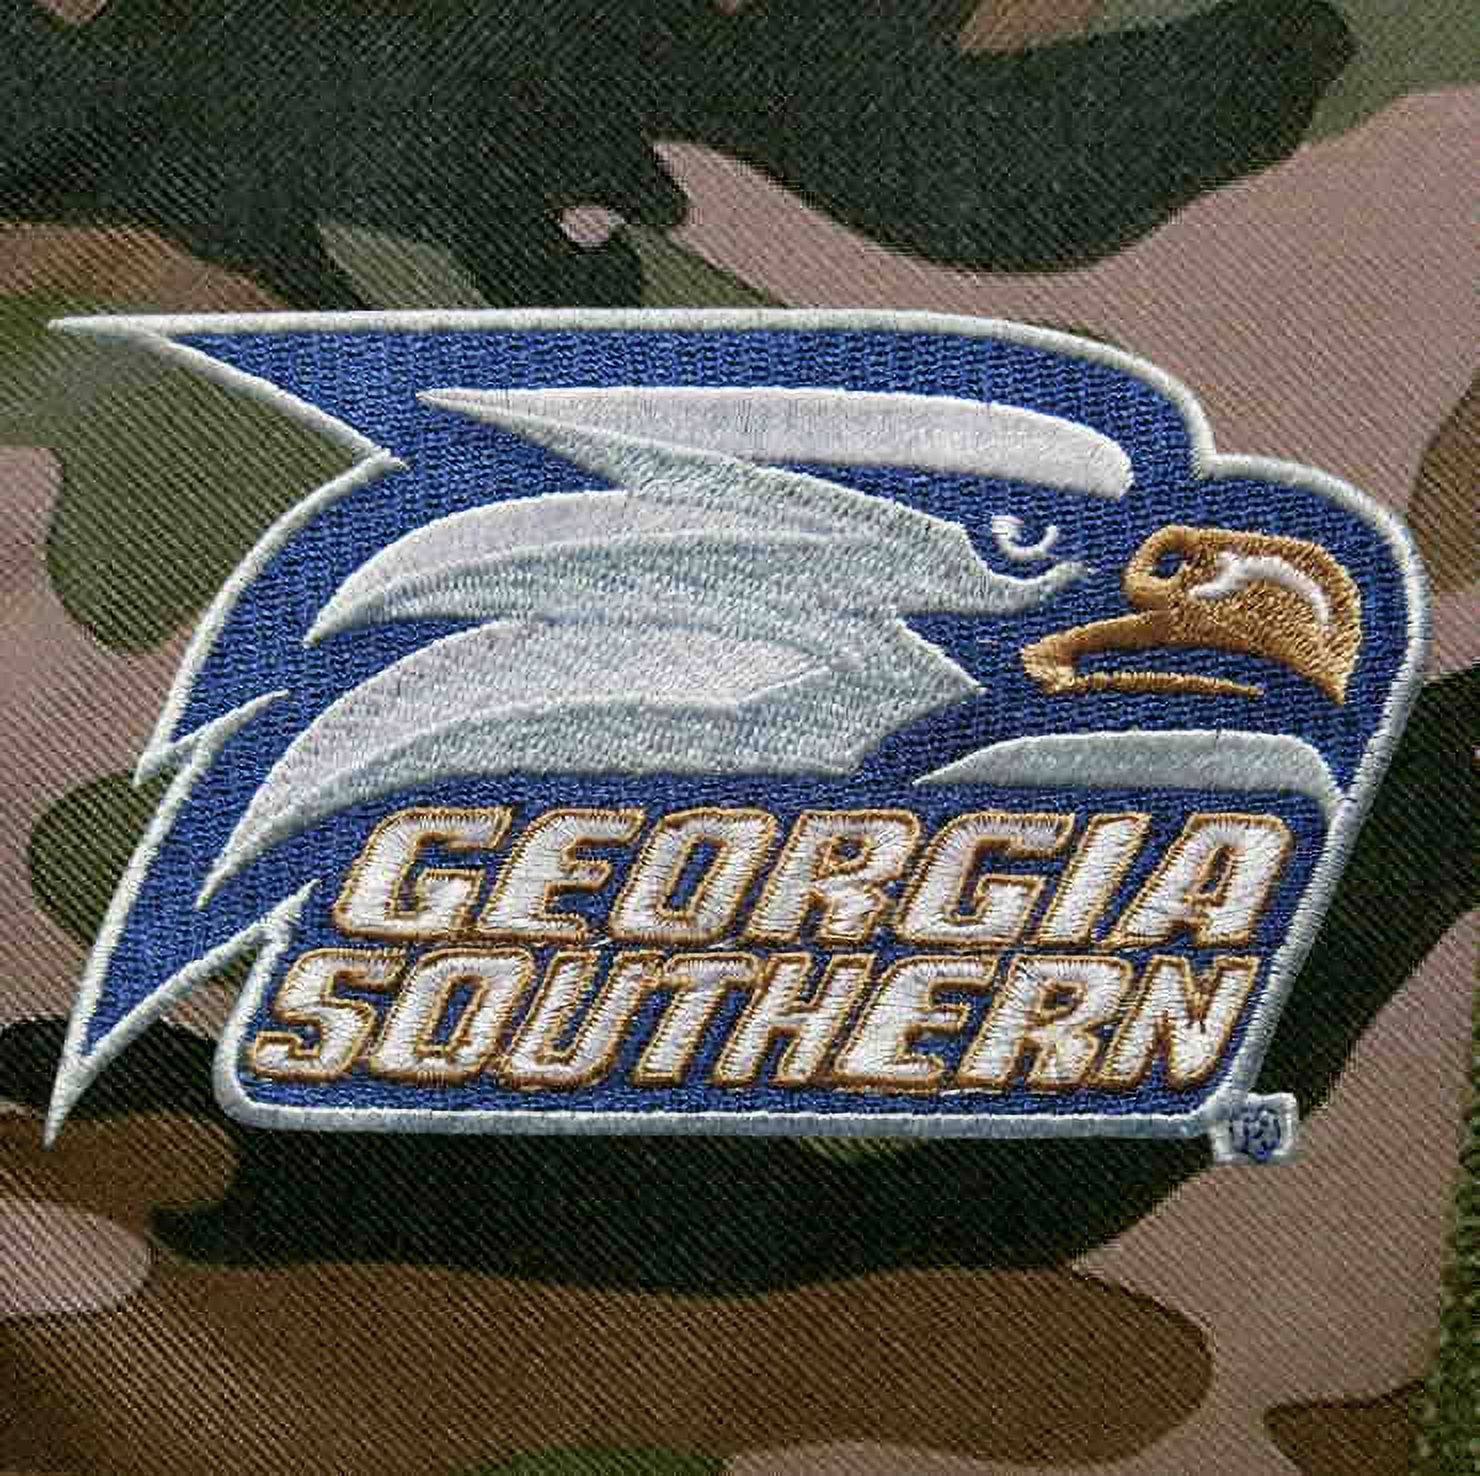 CAMO Georgia Southern Lunch Bag Stylish OFFICIAL Georgia Southern Eagles CAMO Lunchbox Cooler for School or Office - Men or Women - image 2 of 2